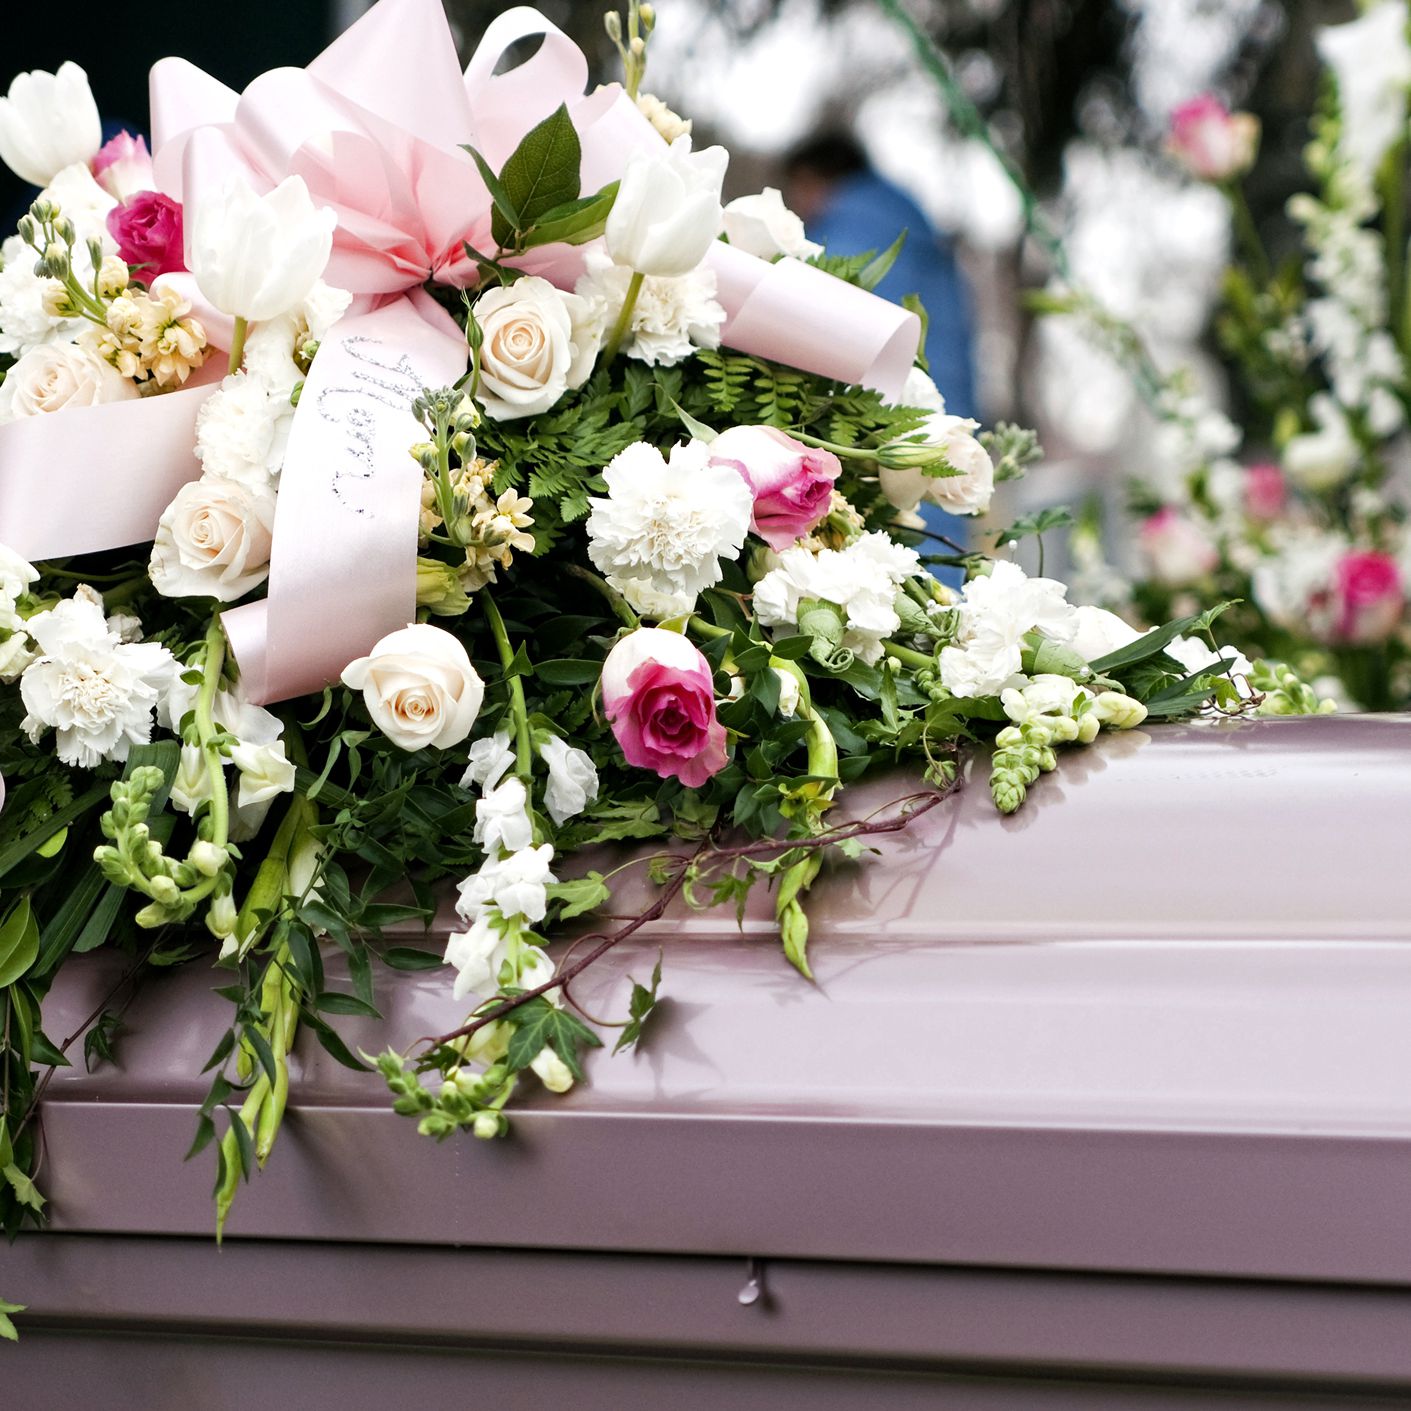 Top Reasons To Choose Asian Funeral Service in London